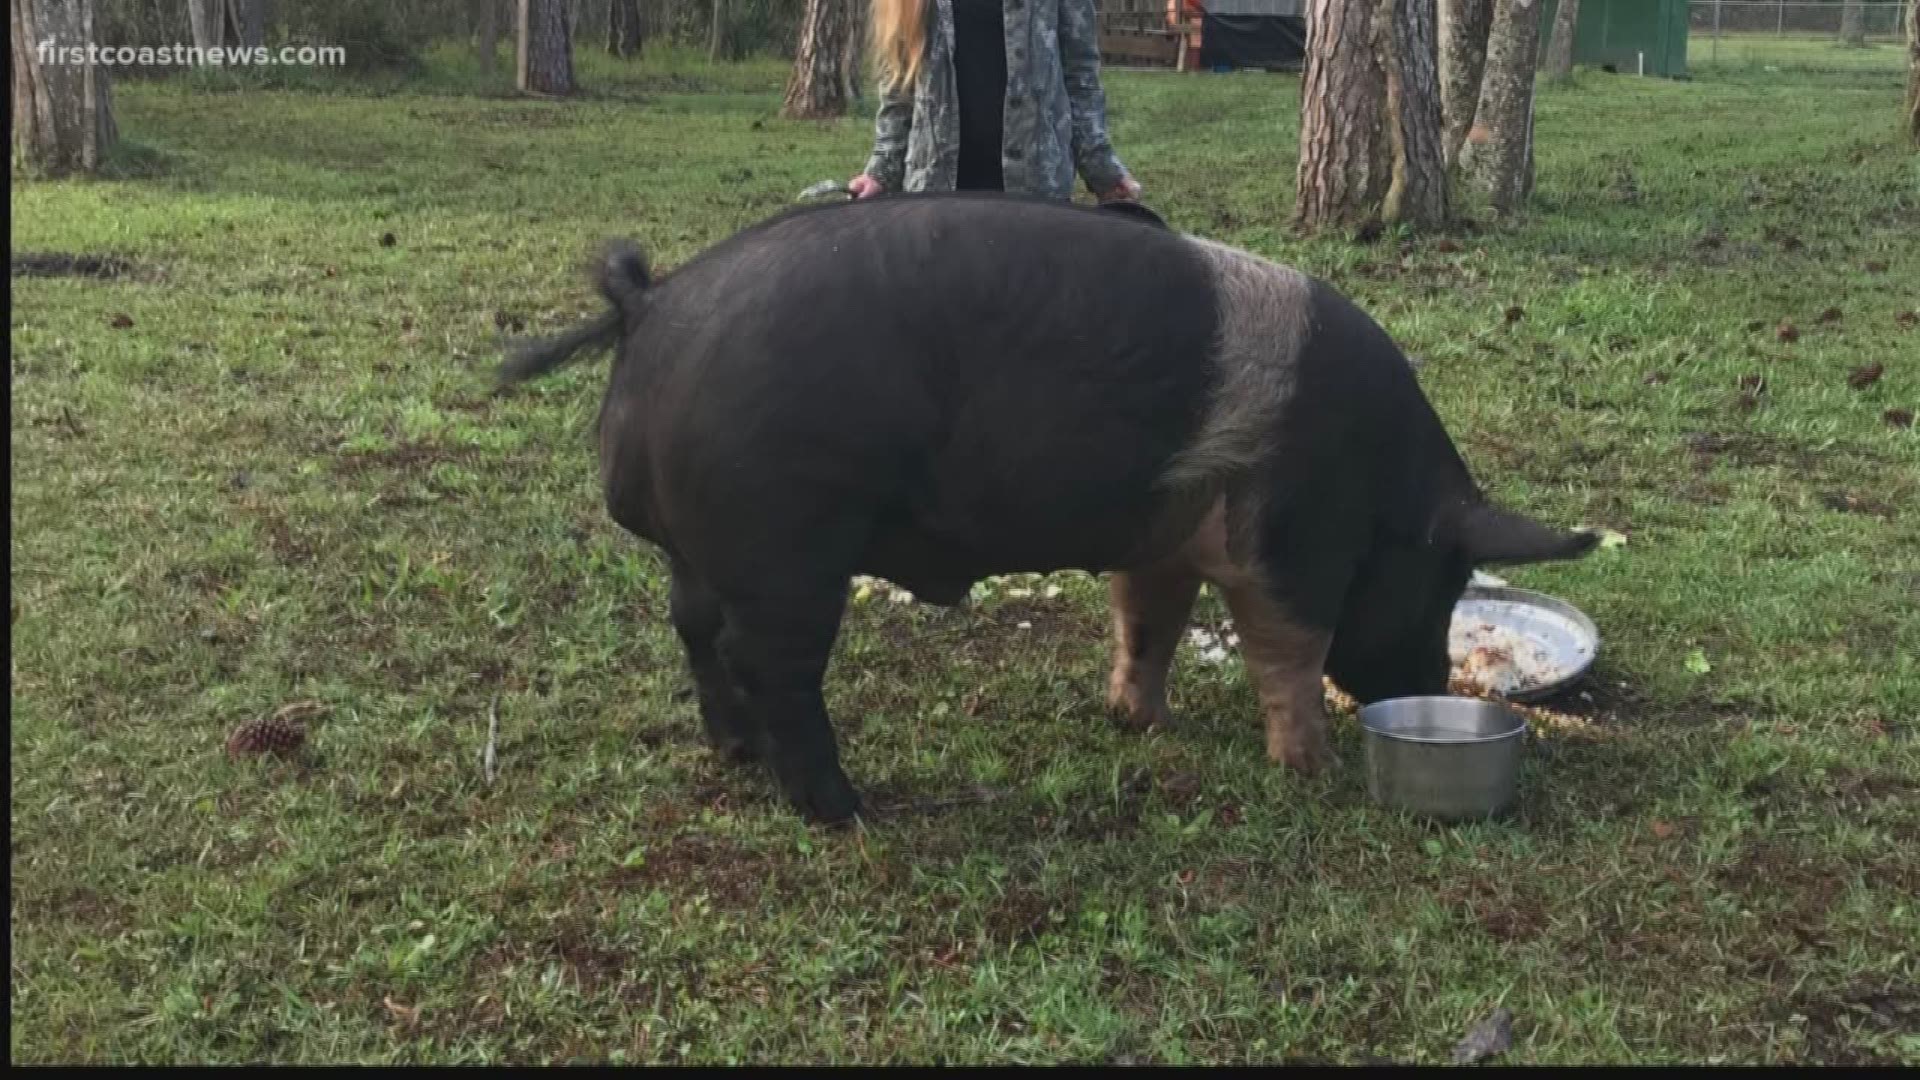 Frankie is a 600 lb. pot belly pig. The family is offering a $5,000 reward for his safe return.